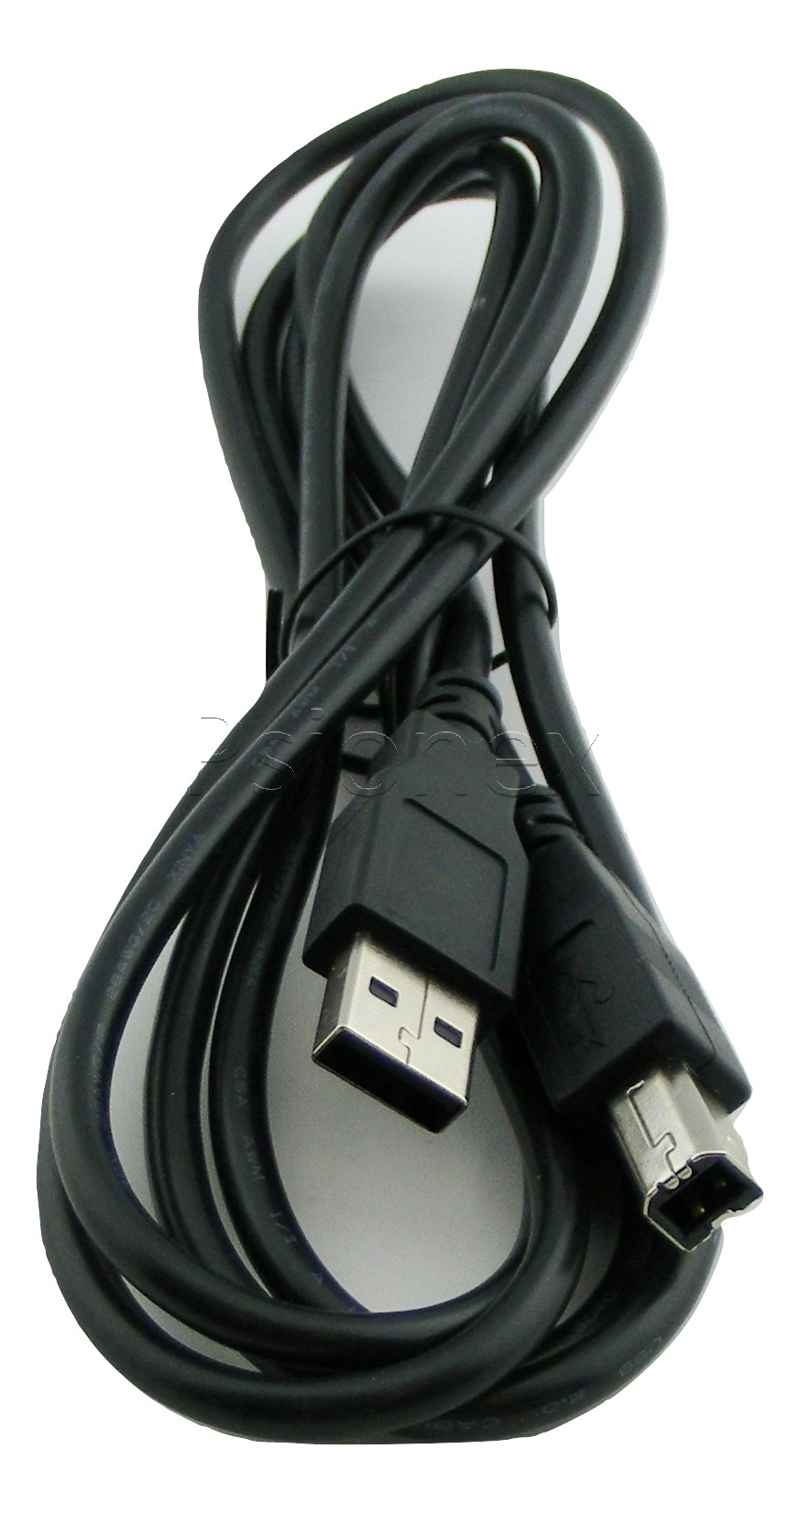 Workabout Pro 1 Adapters & Cables